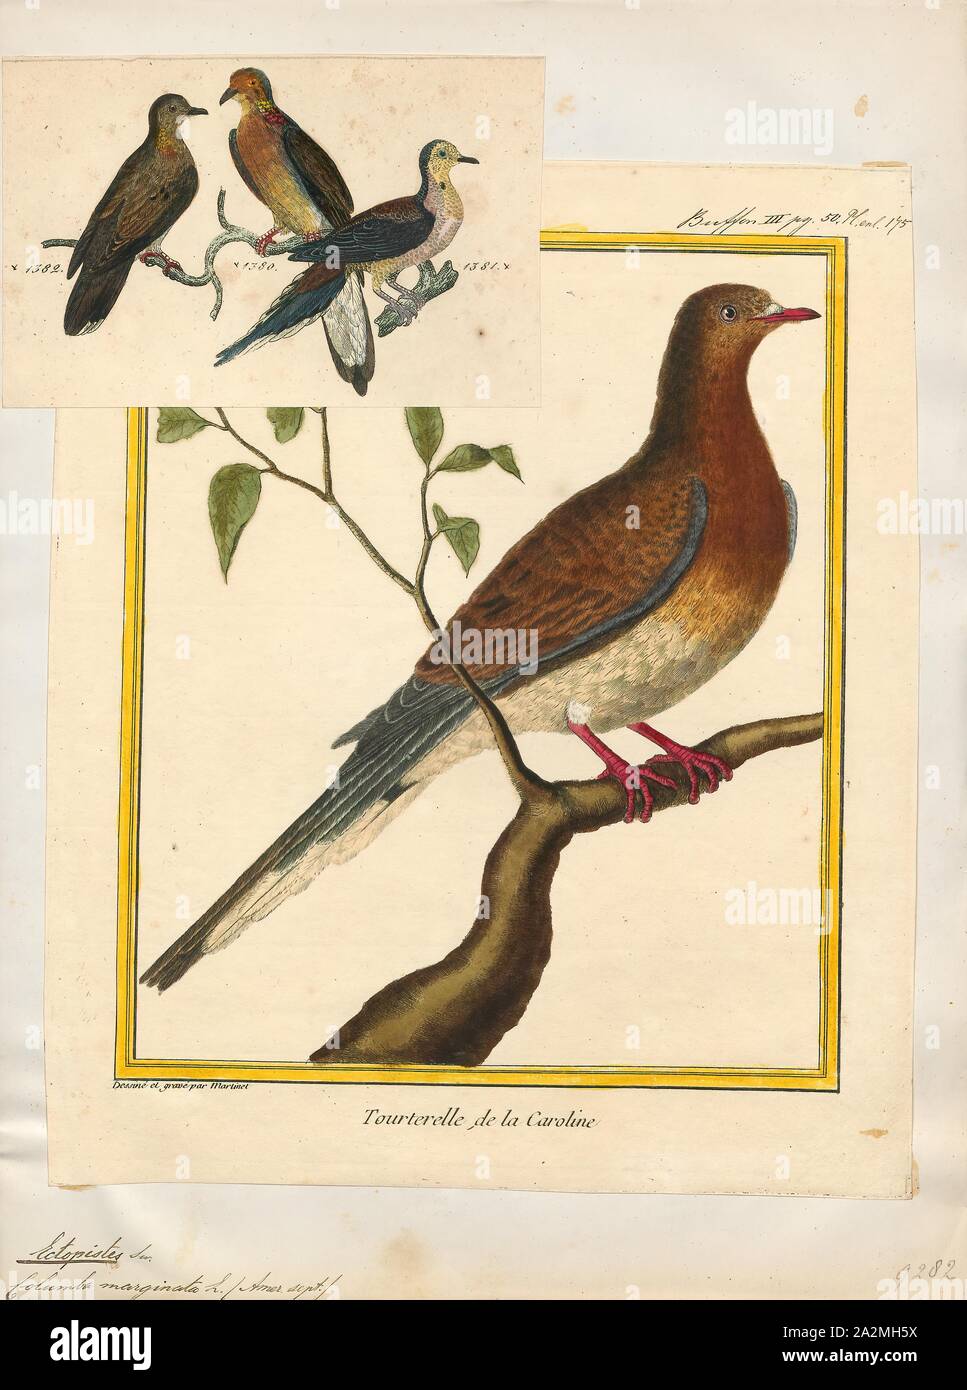 Ectopistes marginata, Print, Passenger pigeon, The passenger pigeon or wild pigeon (Ectopistes migratorius) is an extinct species of pigeon that was endemic to North America. Its common name is derived from the French word passager, meaning 'passing by Stock Photo